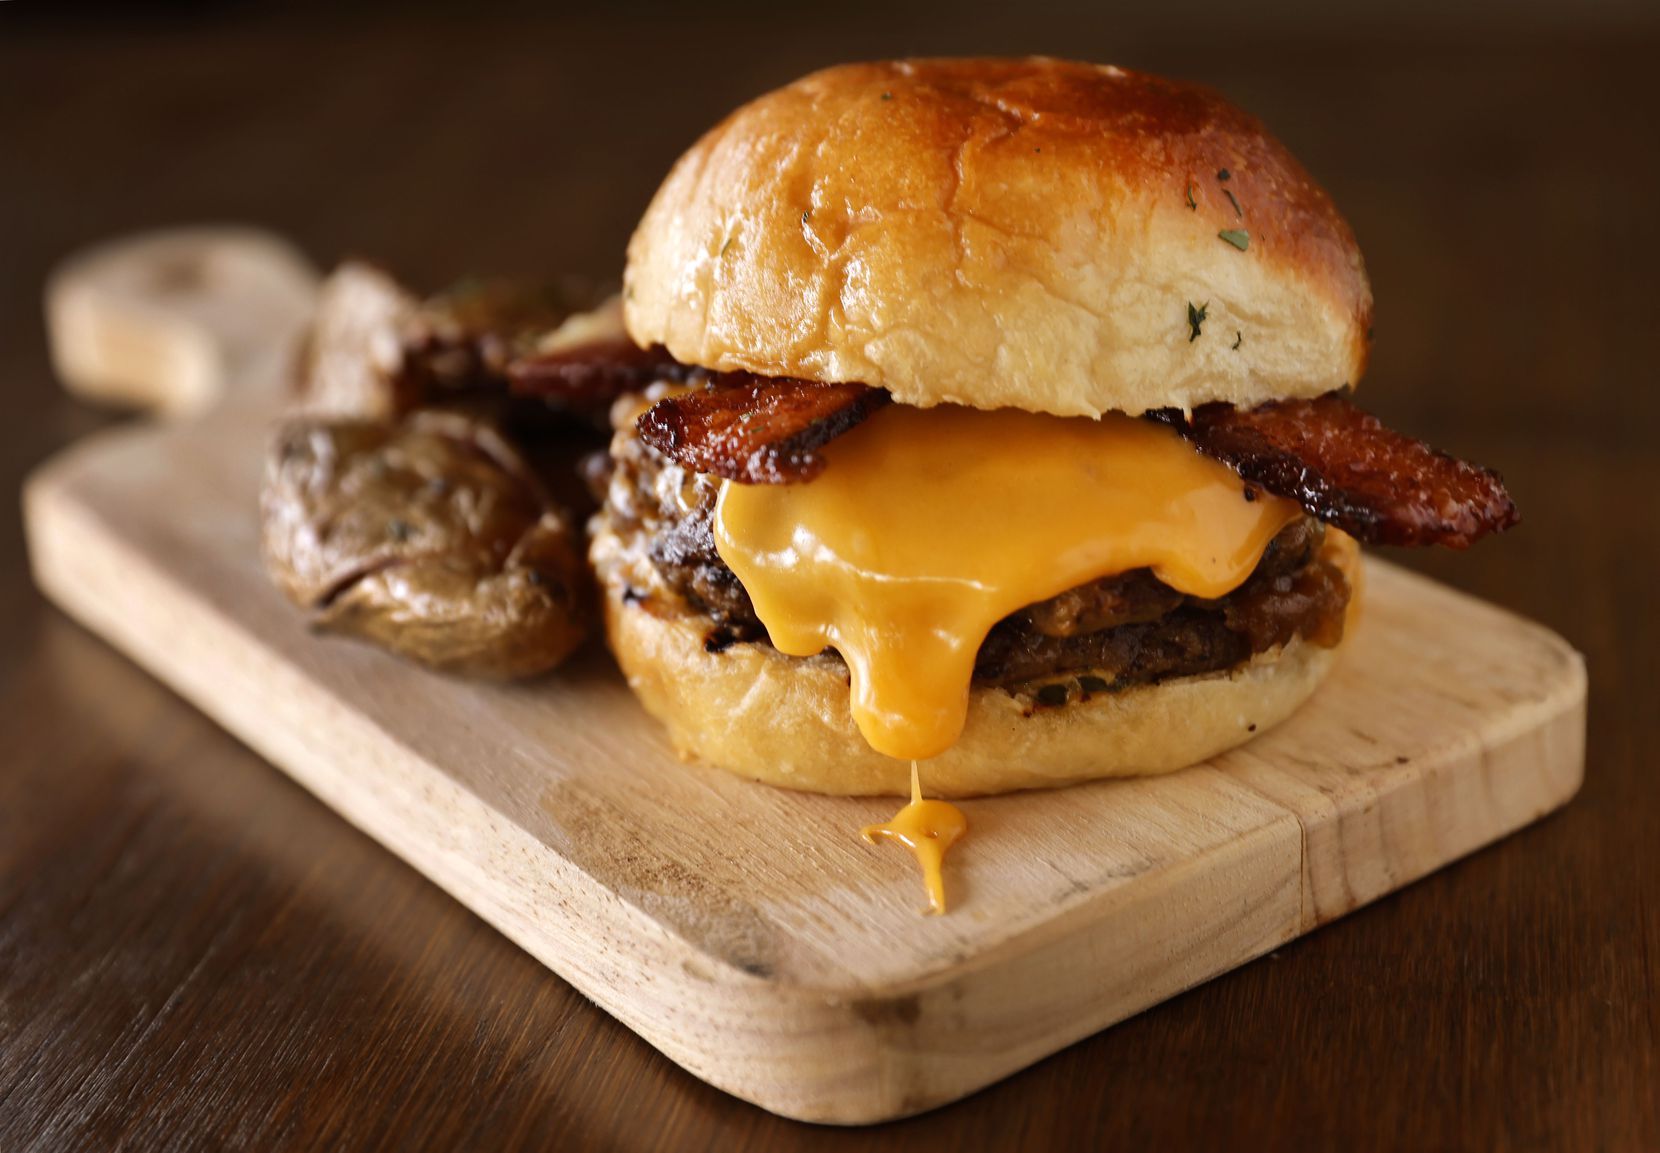 The Main Street Burger, with IPA cheddar and bacon, is one of the most popular items at The...